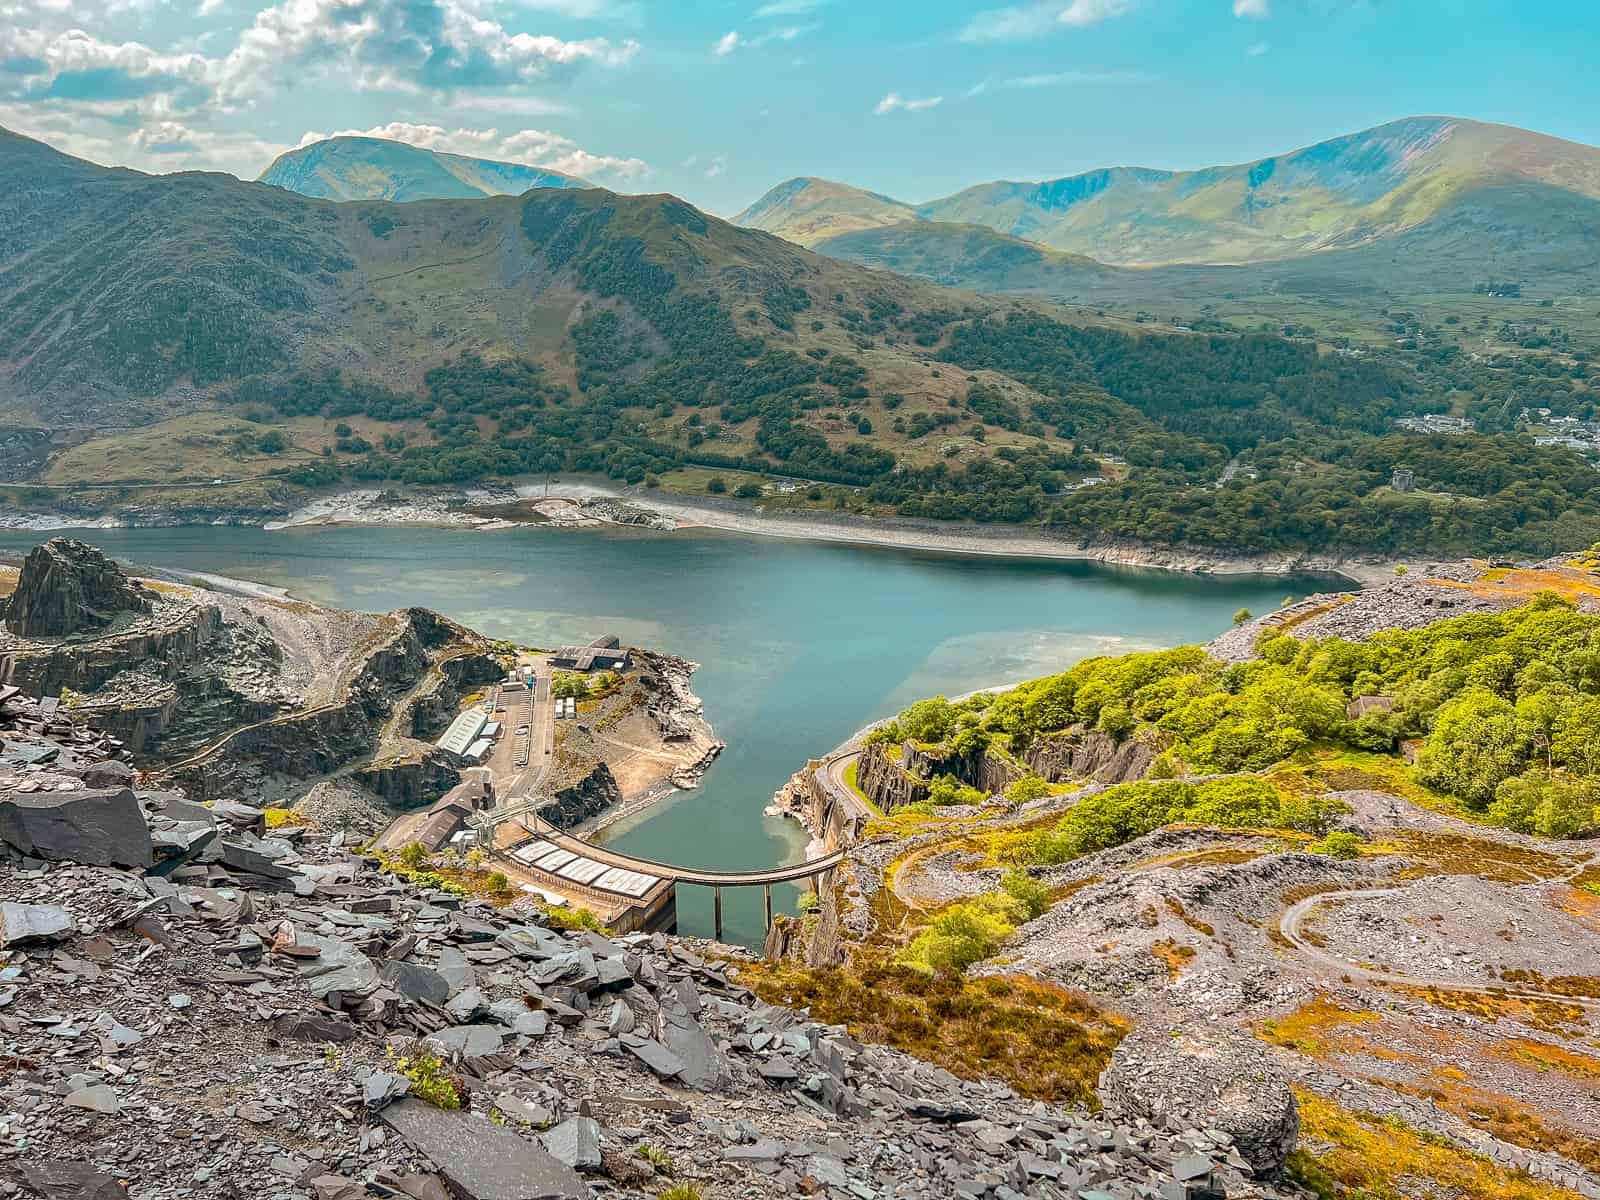 How to Visit Dinorwic Quarry Wales